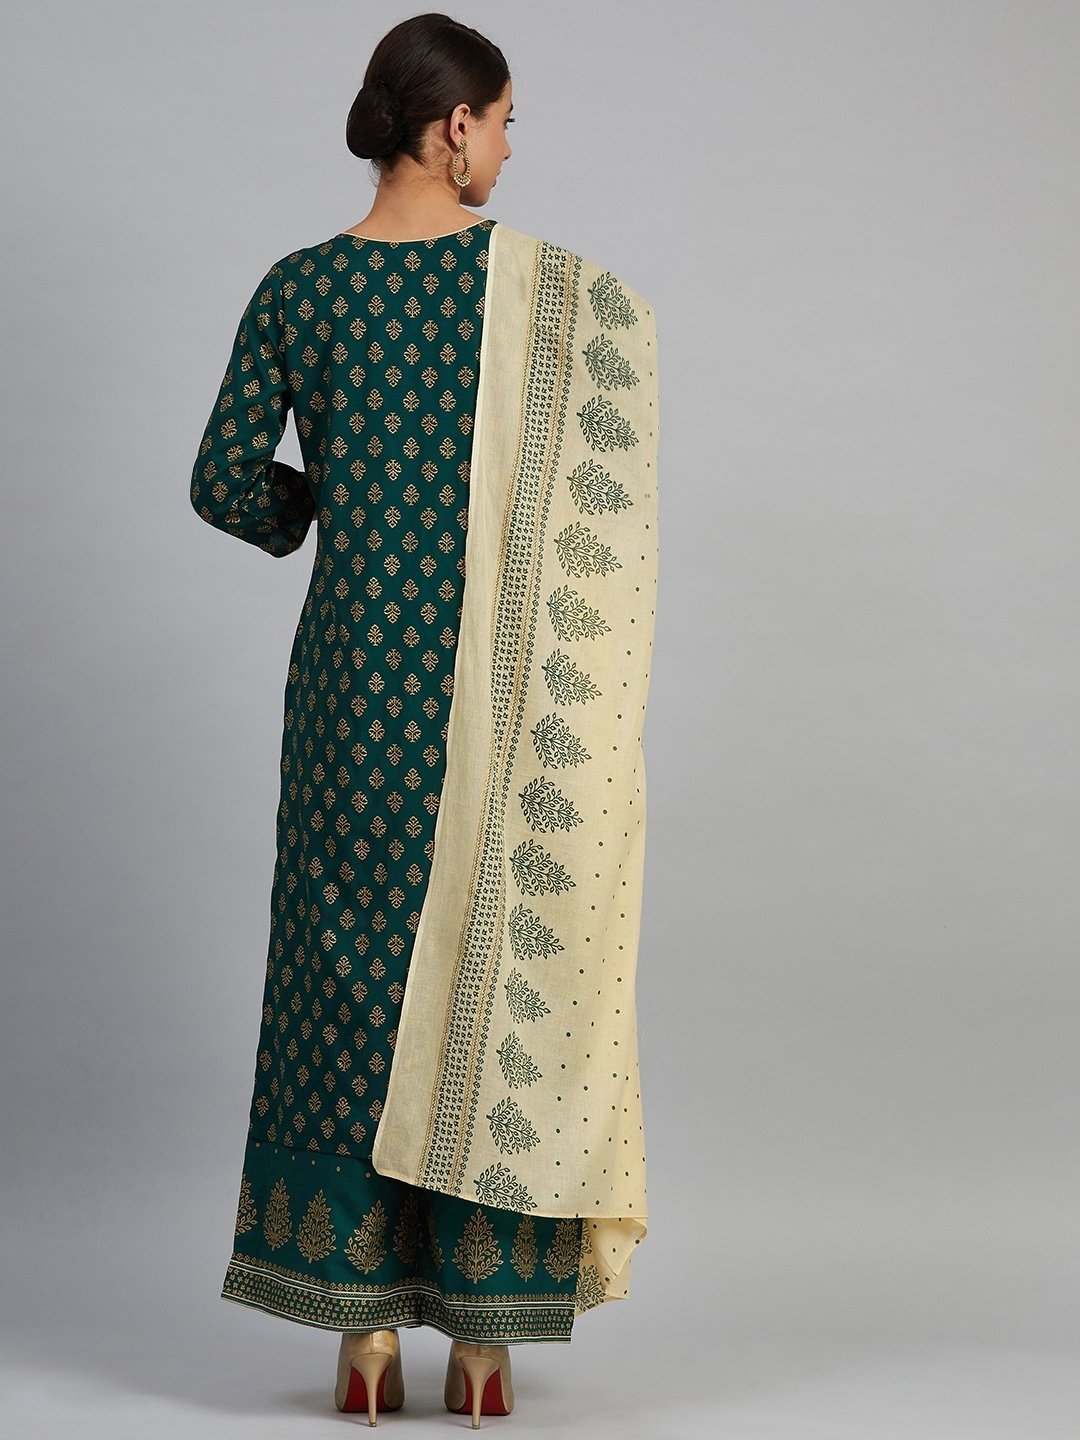 Green, golden and cream-coloured printed kurta with palazzos and dupatta